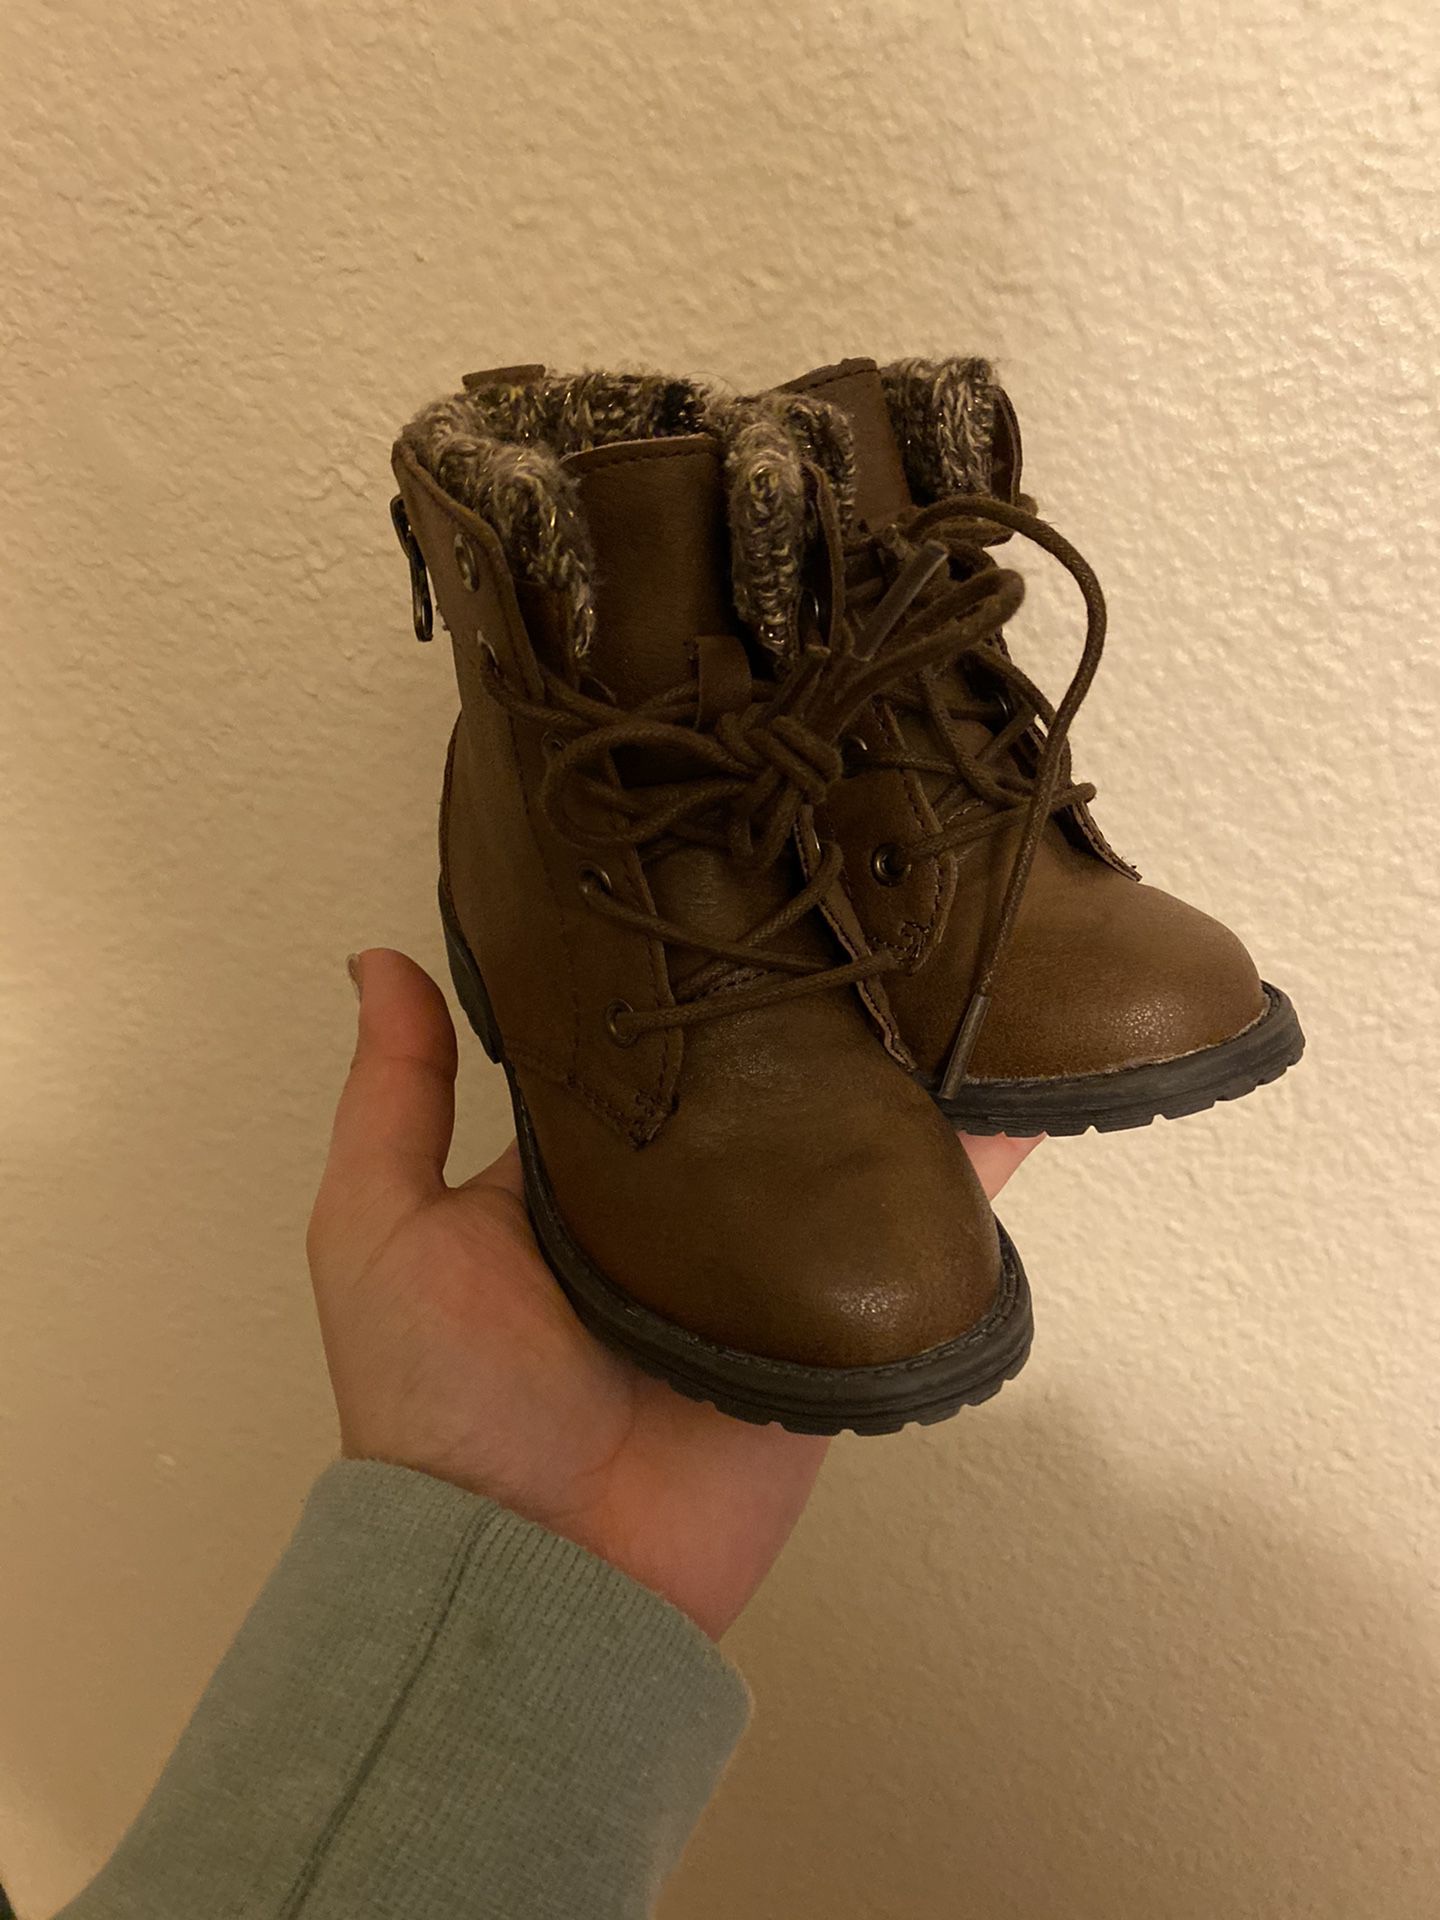 Toddler brown boots